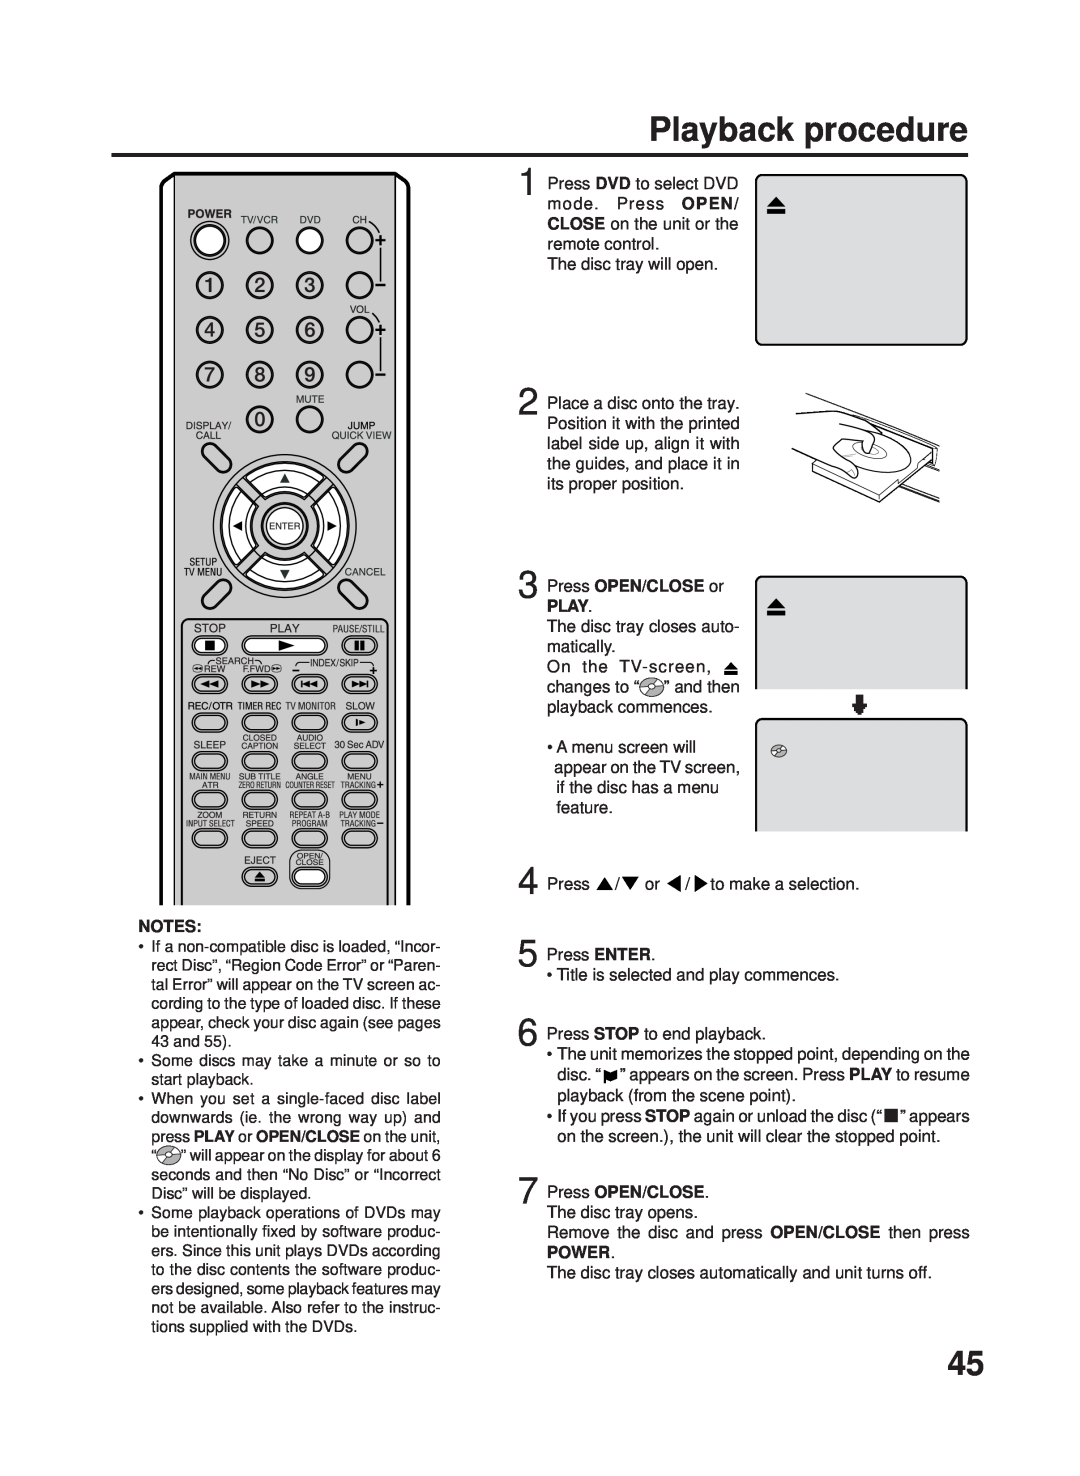 RCA 27F500TDV manual Playback procedure, Press OPEN/CLOSE or PLAY, Press OPEN/CLOSE. The disc tray opens, Power 